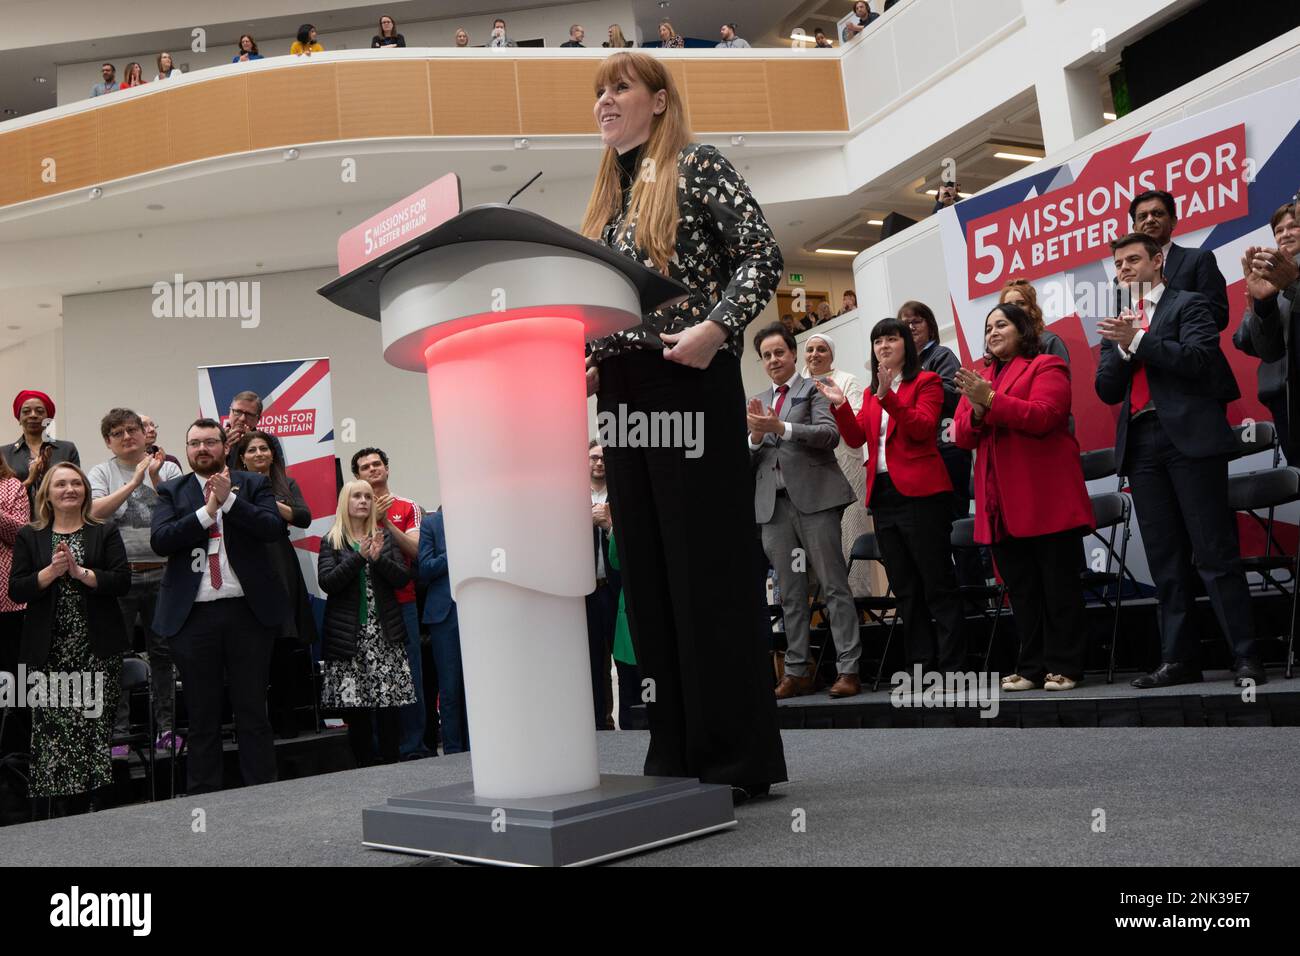 Angela Rayner speaks before Keir Starmer launches five bold missions for a better Britain at 1 Angel Square, Manchester UK. The Labour leader spoke in front of shadow cabinet colleagues and manchester based politicians. He outlined the purpose of missions as. “It means providing a clear set of priorities.  A relentless focus on the things that matter most.” Picture: garyroberts/worldwidefeatures.com Stock Photo